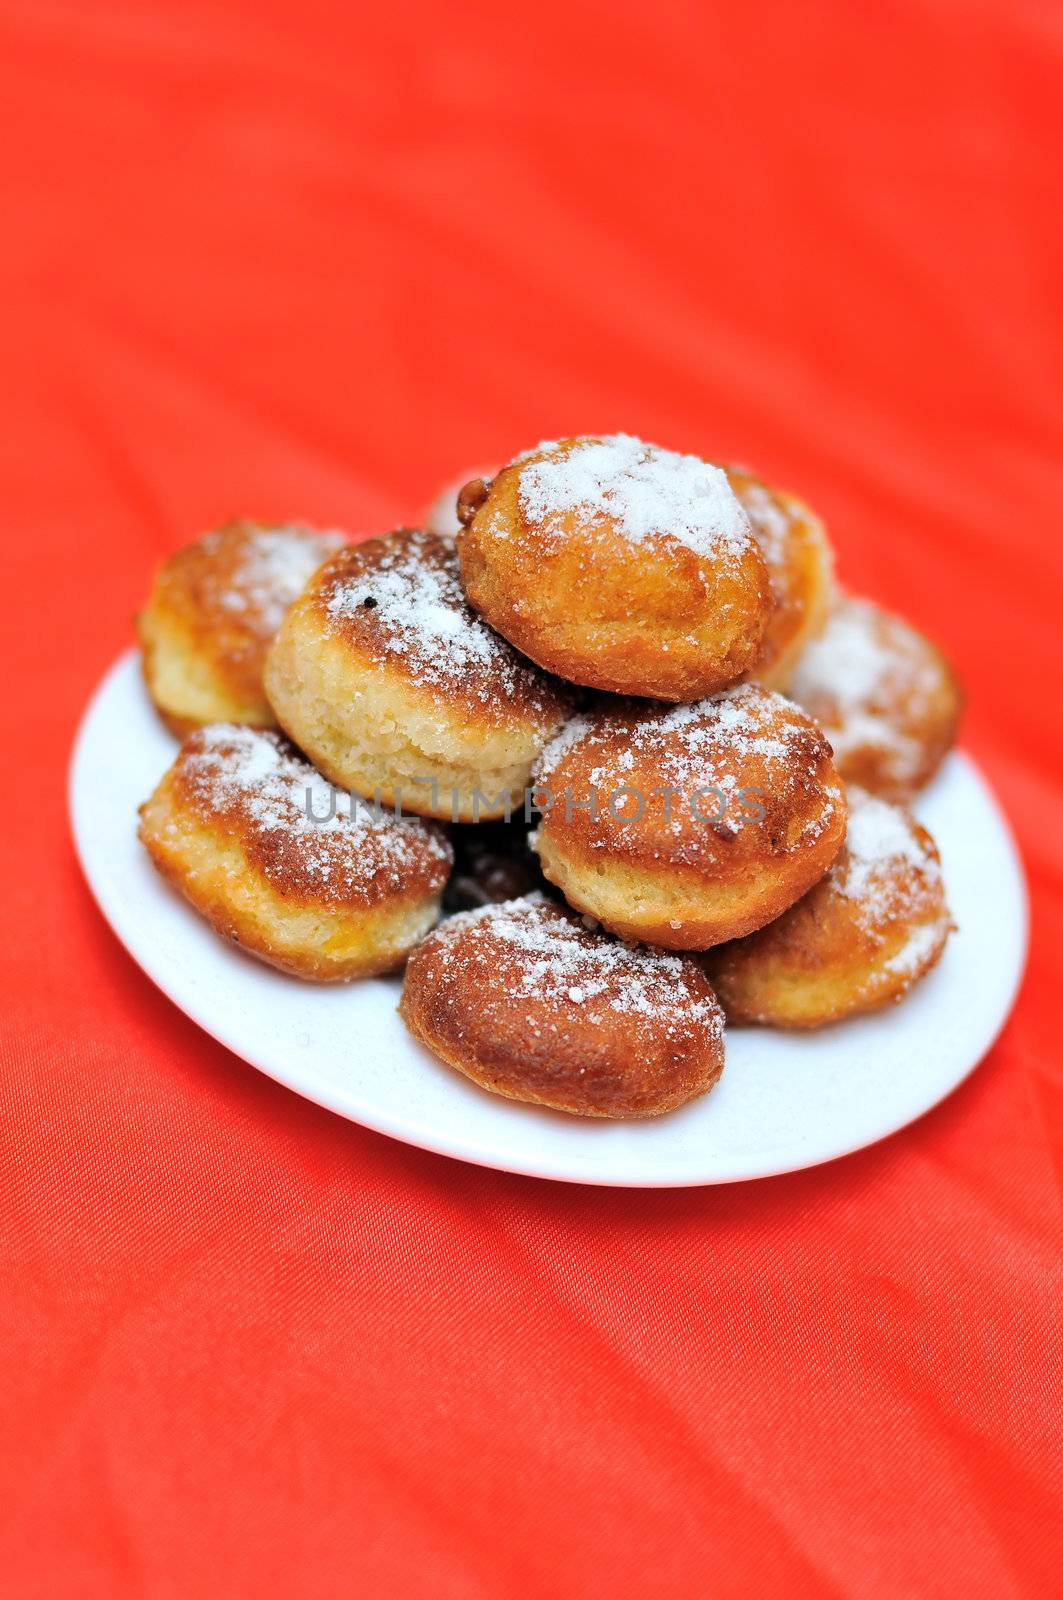  	russian doughnuts are made from farmer cheese